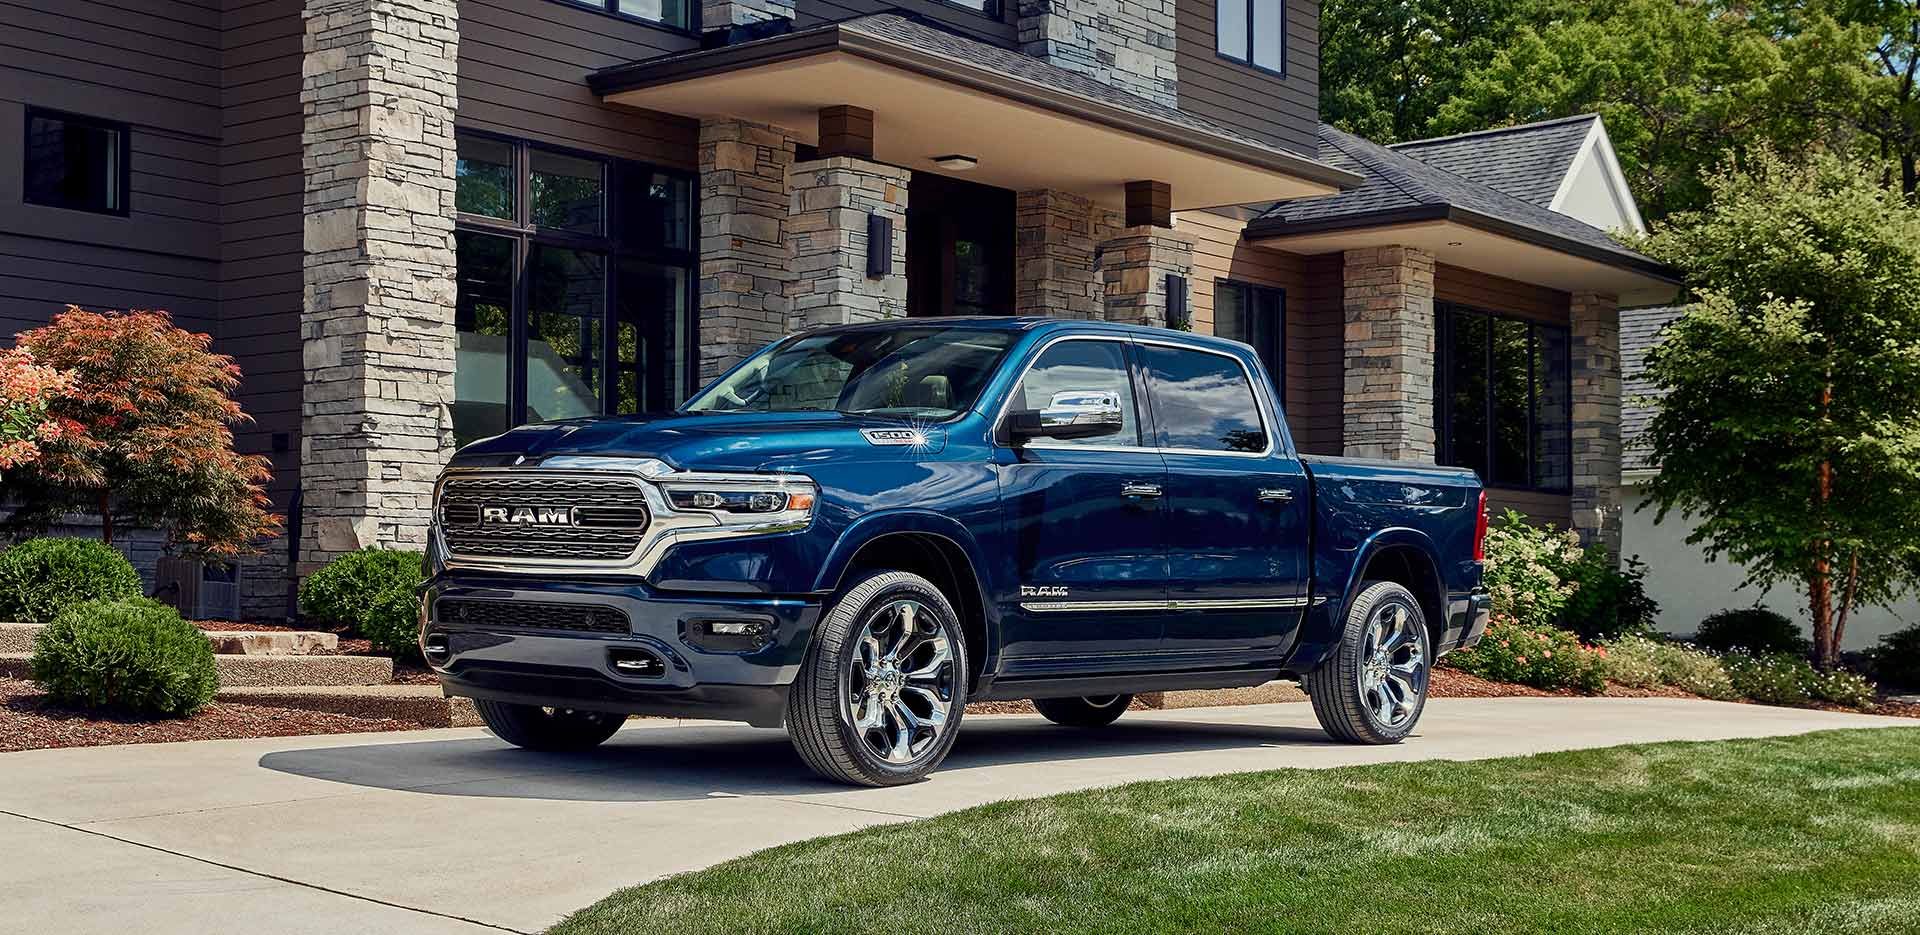 blue Ram 1500 truck parked in front of a new home